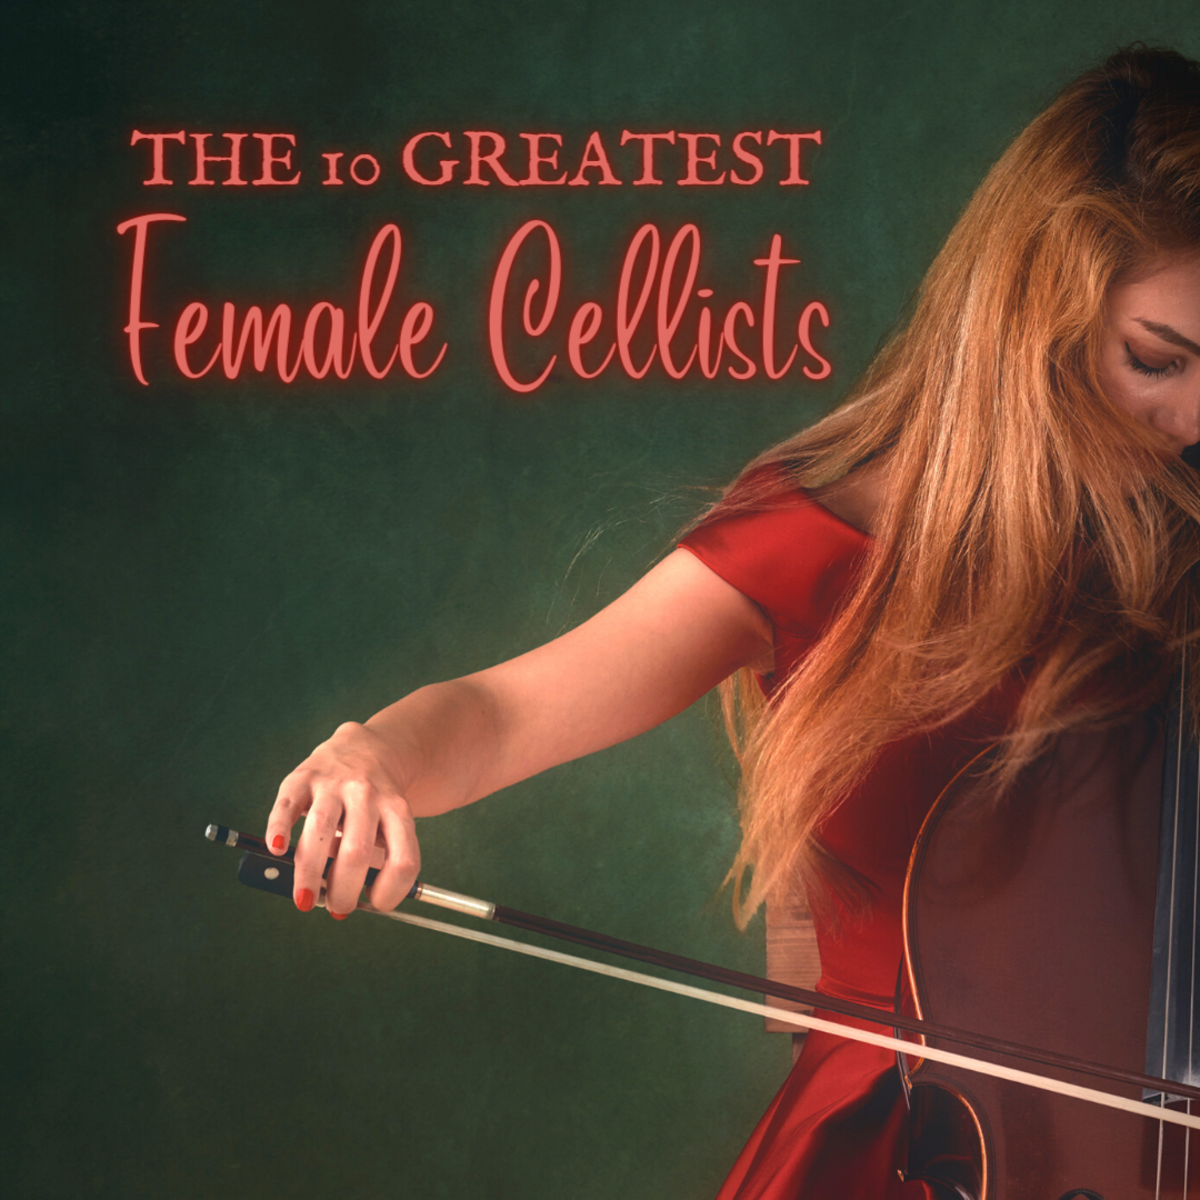 Who are the most talented female cellists of all time? Read on to find out!